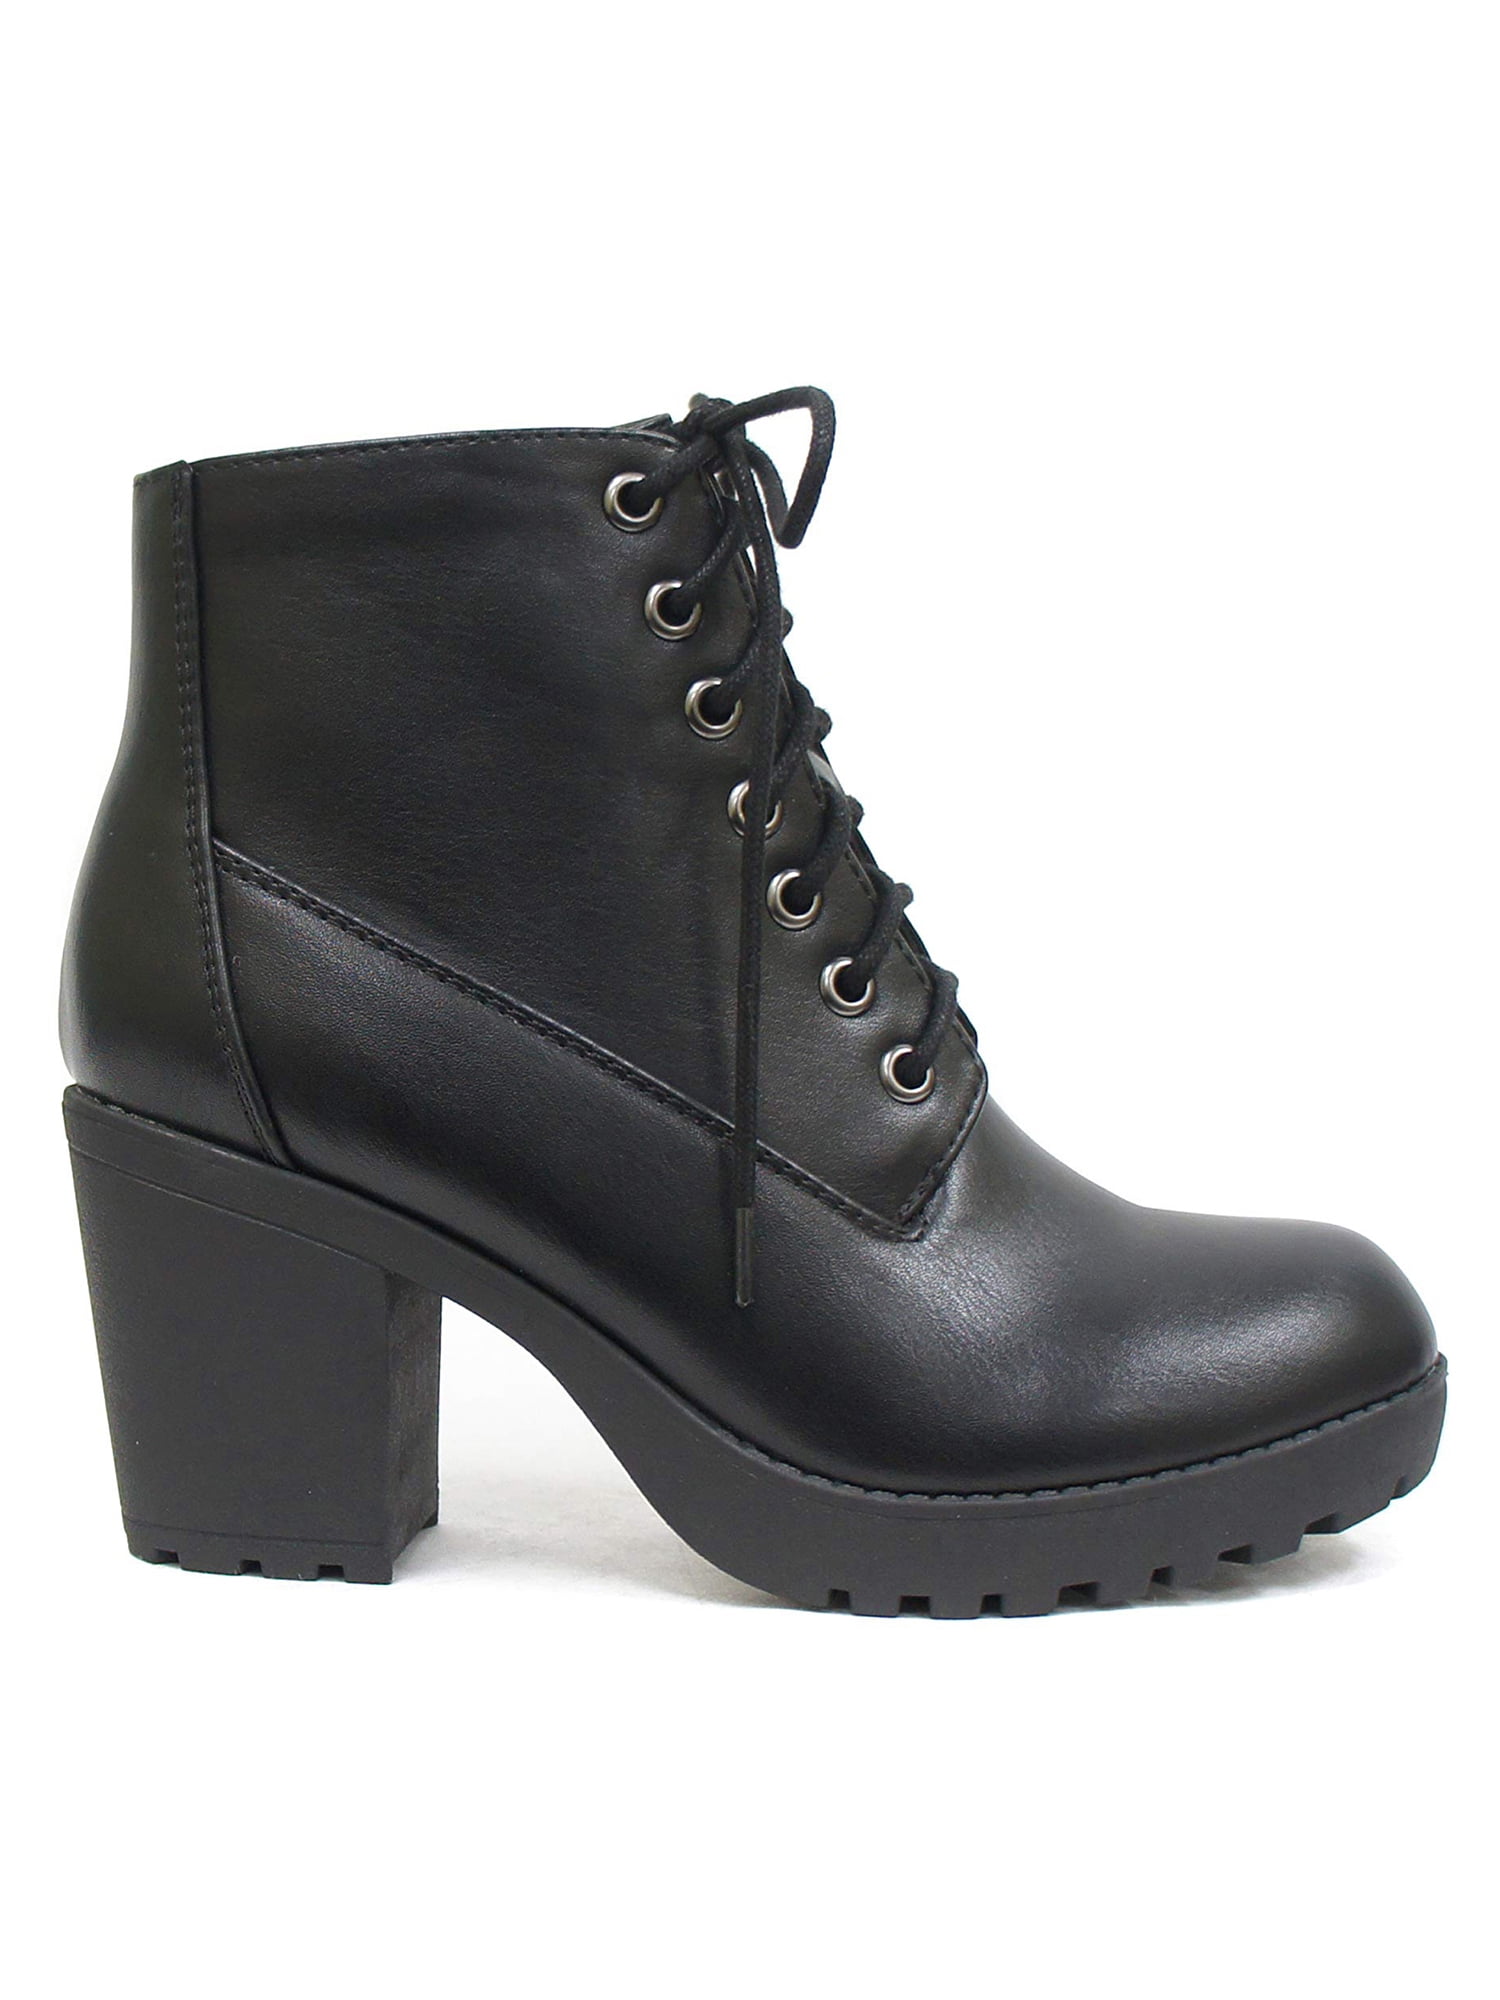 Black Heeled Boots – stylevane.com | Fashion shoes, Heels, Combat boots  style